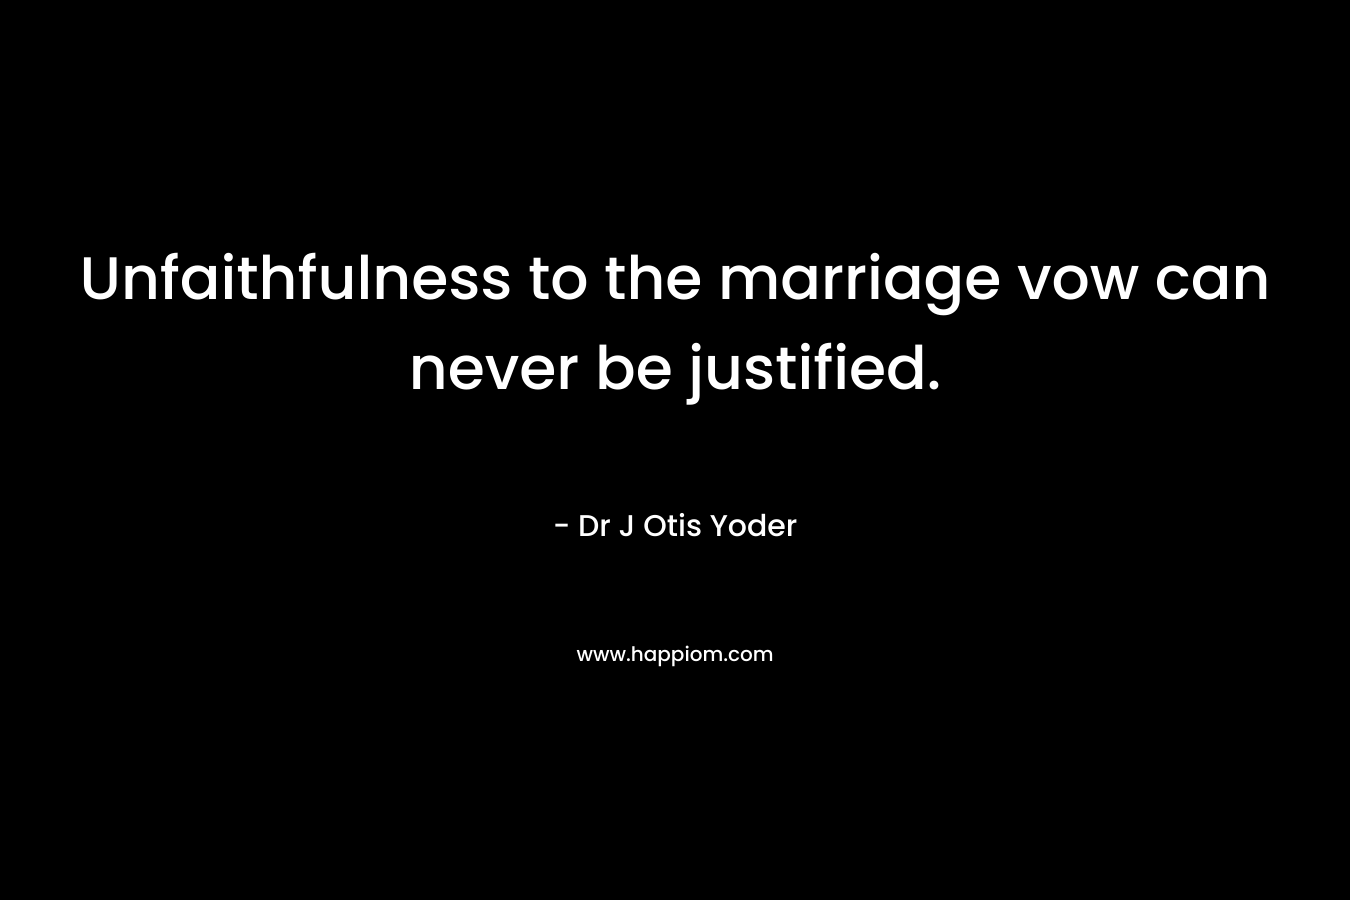 Unfaithfulness to the marriage vow can never be justified. – Dr J Otis Yoder